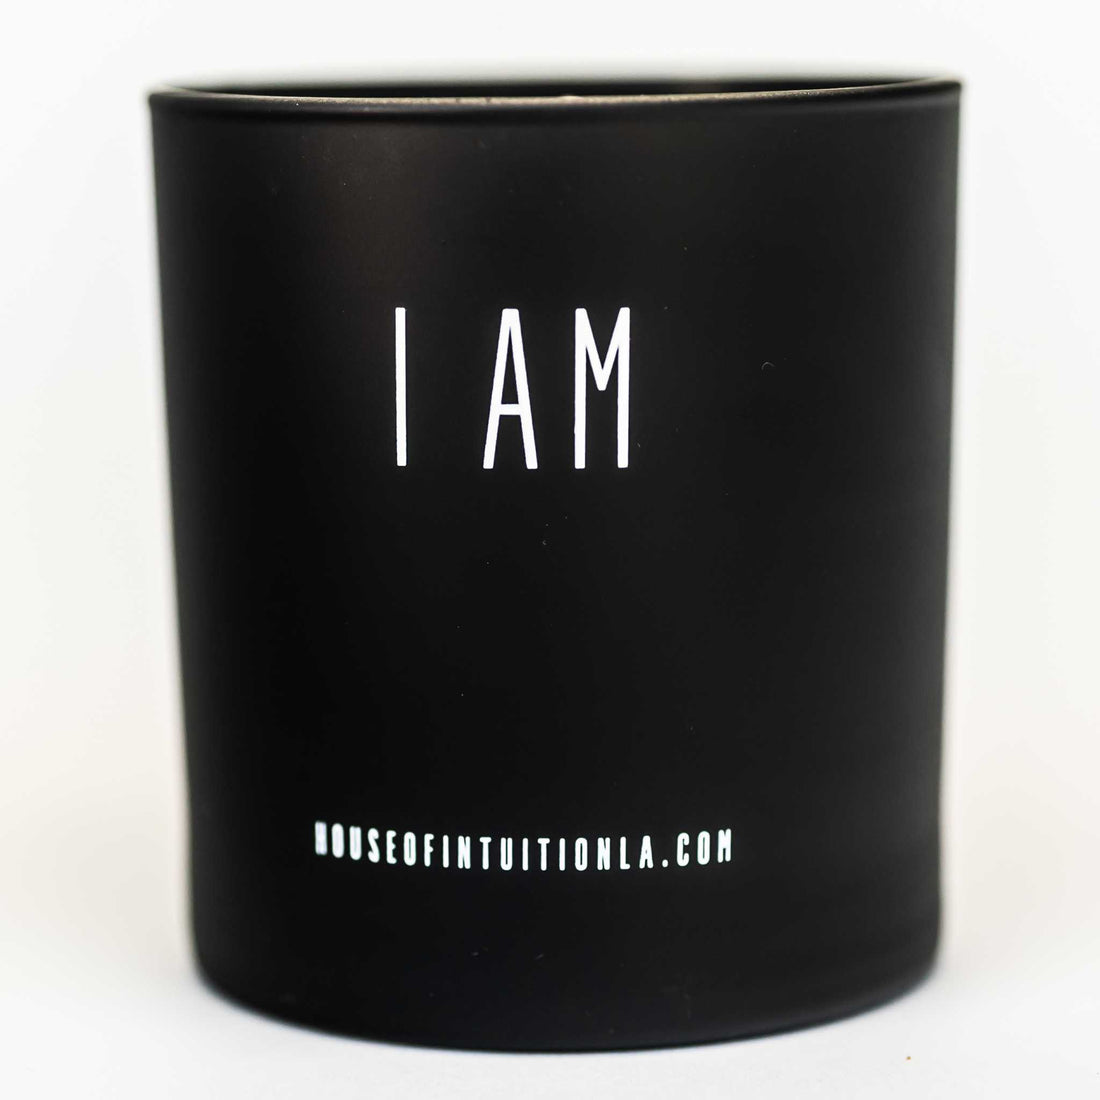 I AM Powerful - Affirmation Soy Candle I AM - Affirmation Candles House of Intuition 